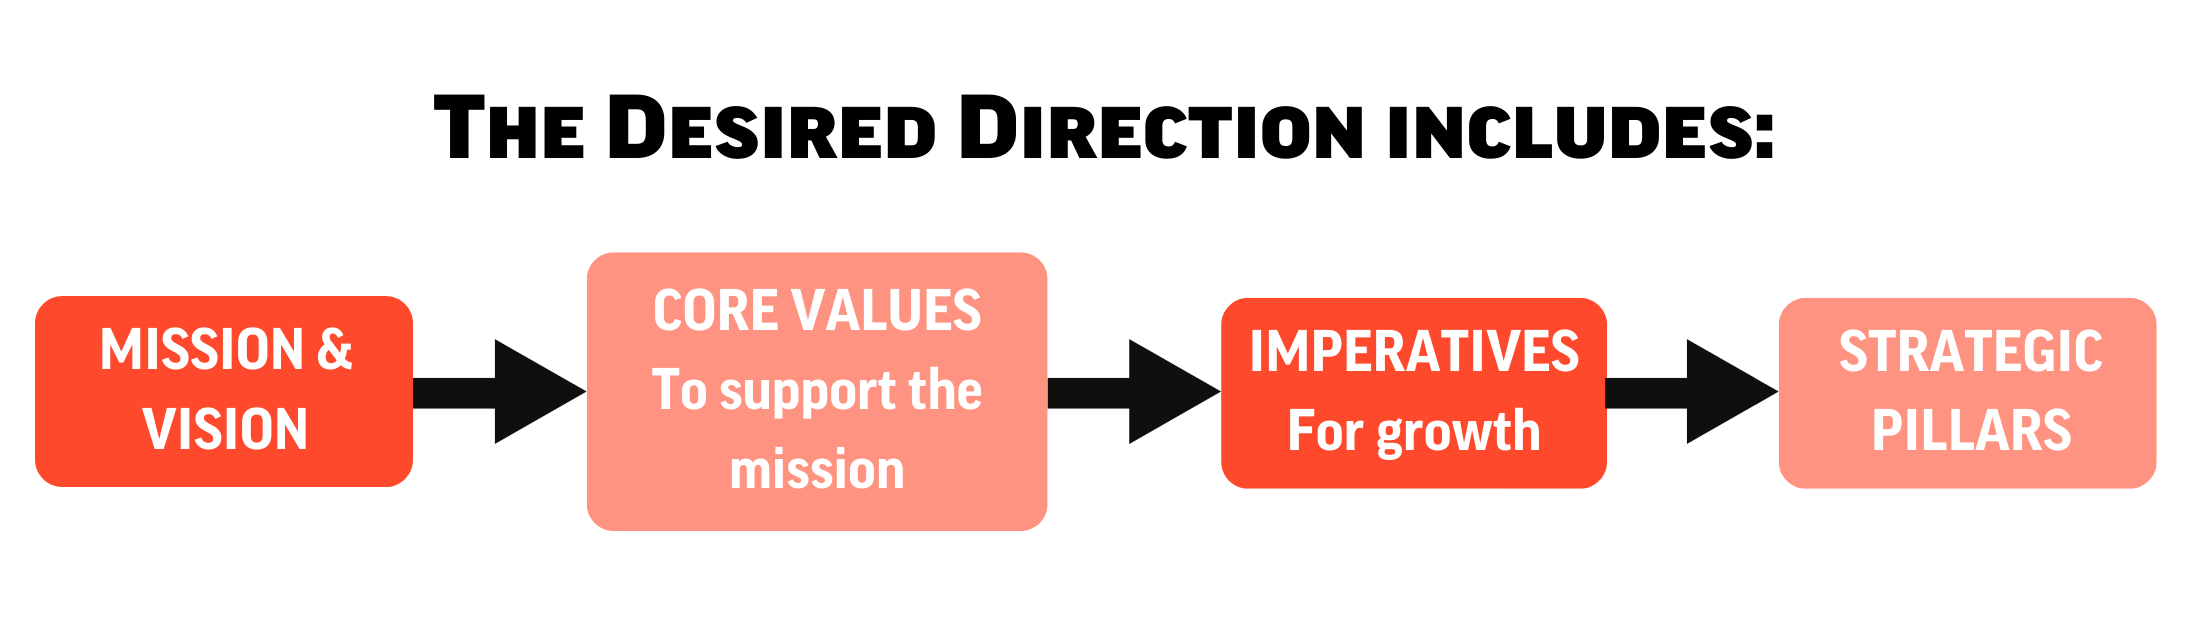 Desired Direction